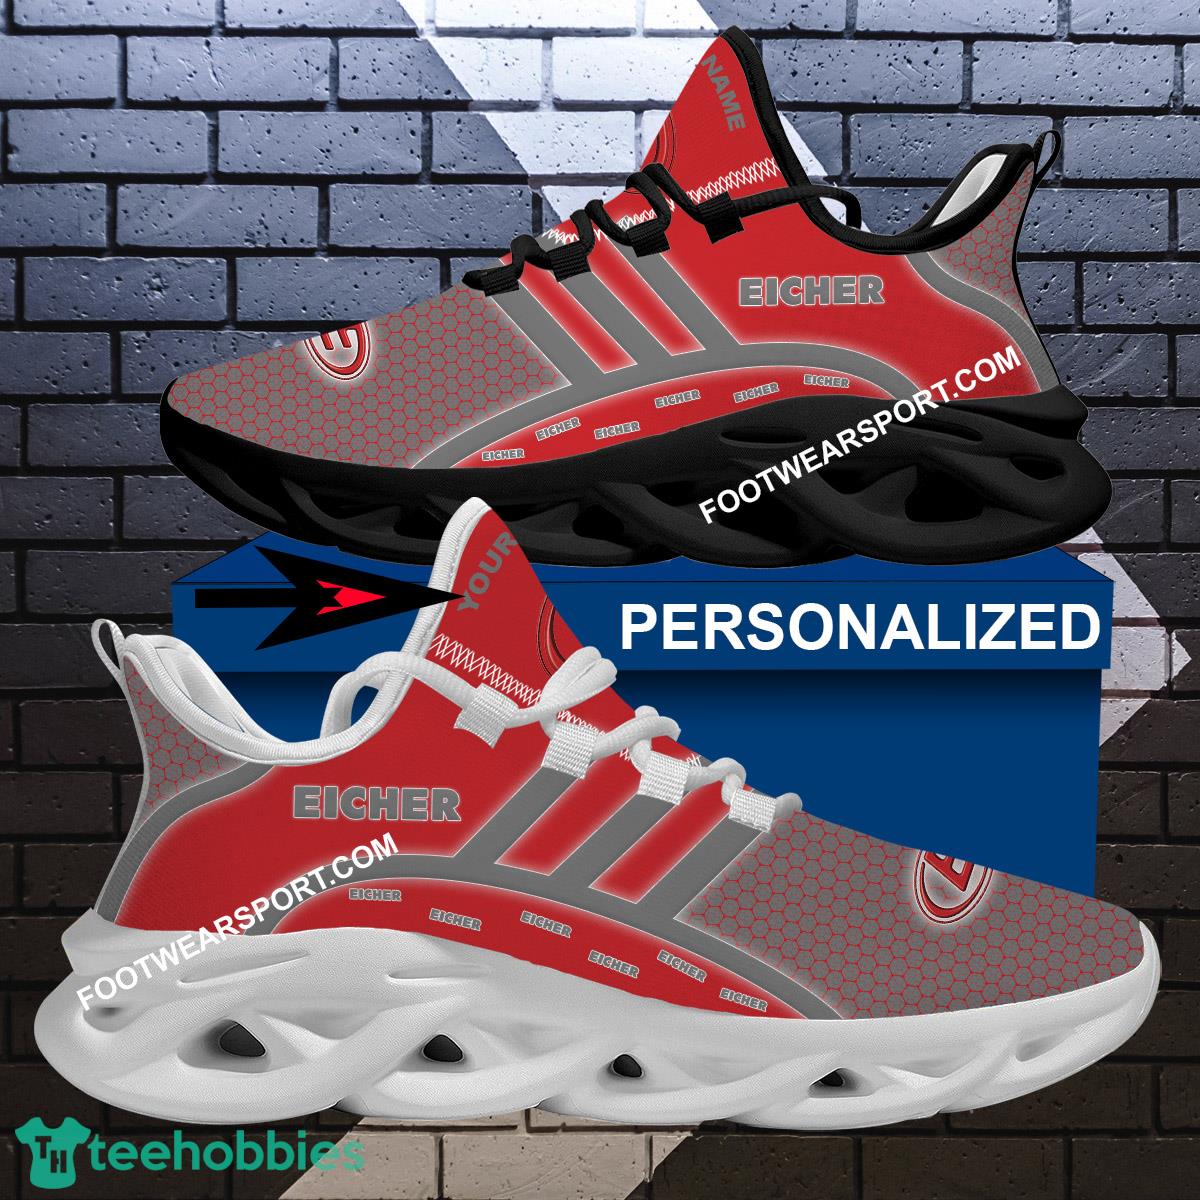 Eicher Tractor Max Soul Shoes Brand For Fans Gift Visual Sport Sneaker Custom Name Max Soul Shoes - Eicher Tractor Brand Max Soul Sneaker Personalized_1